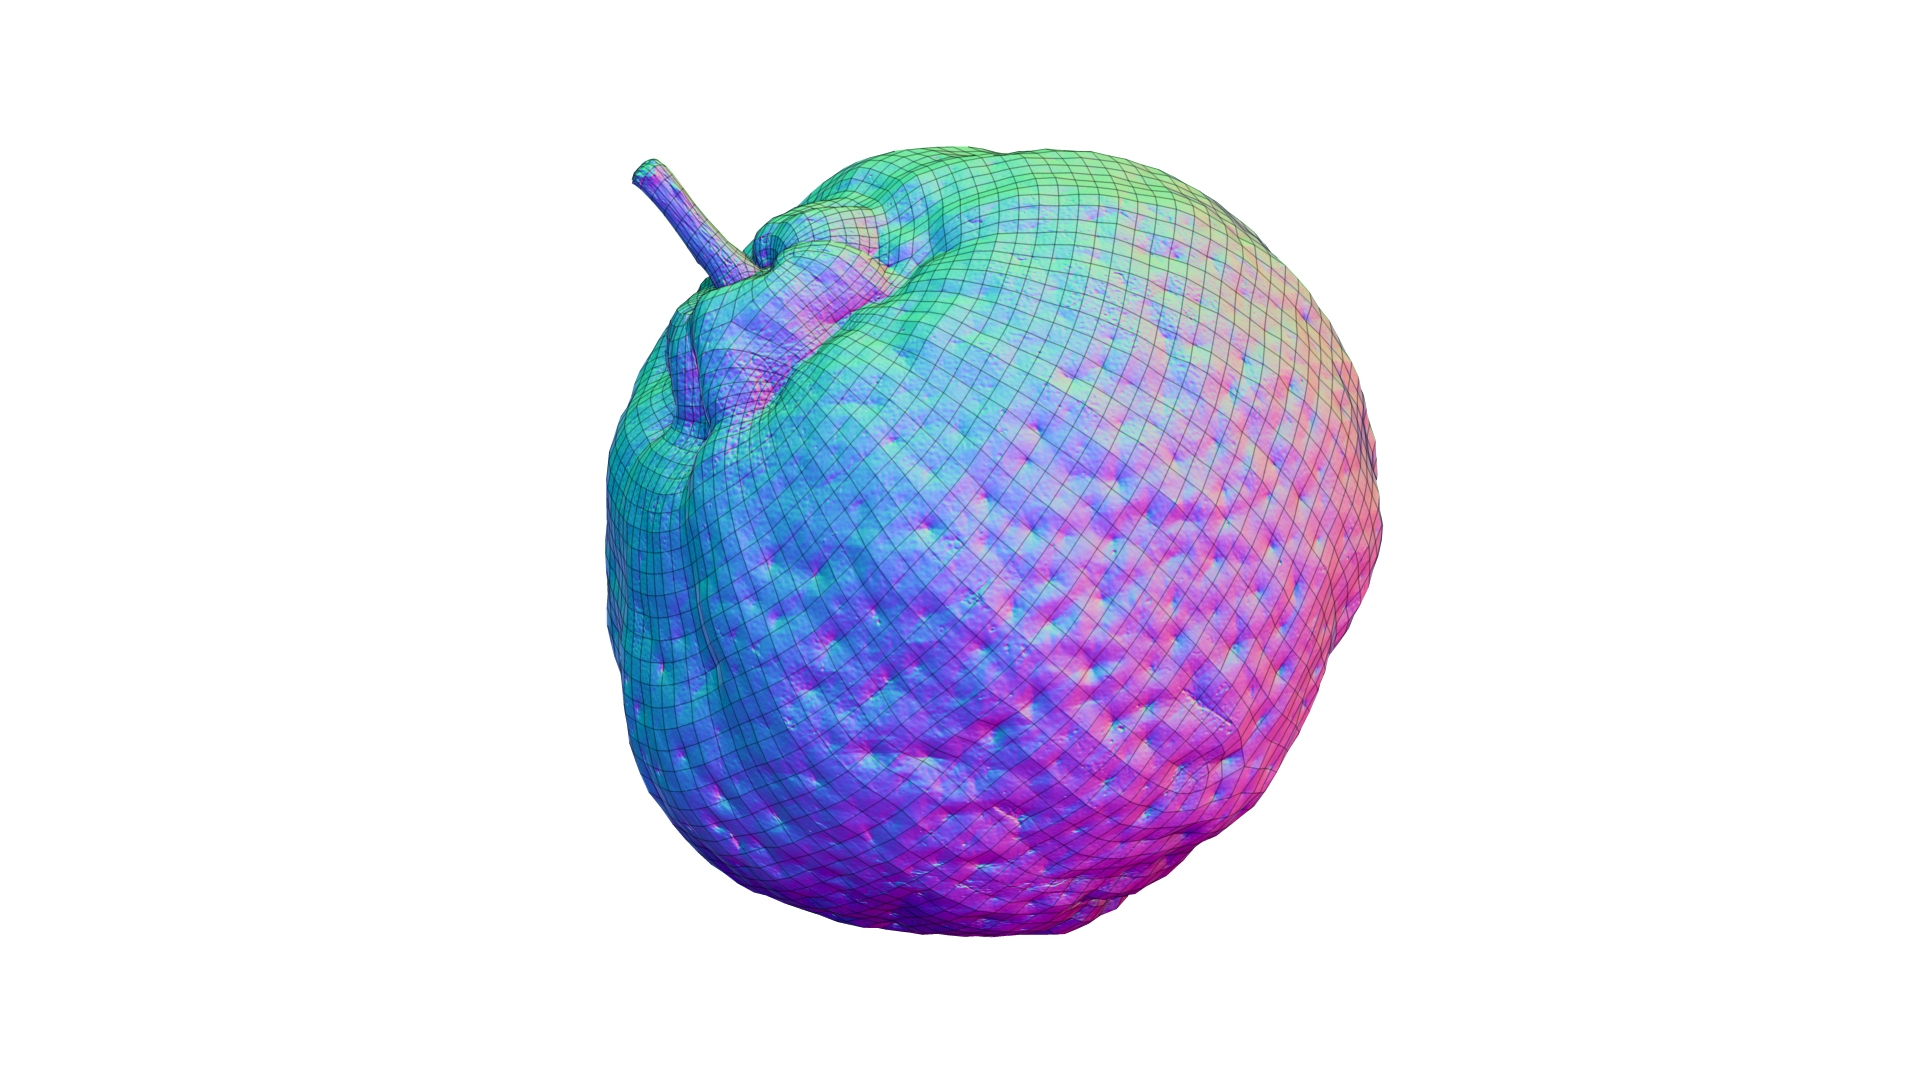 Tangerine - Real-Time 3D Scanned 3D model - TurboSquid 1732919